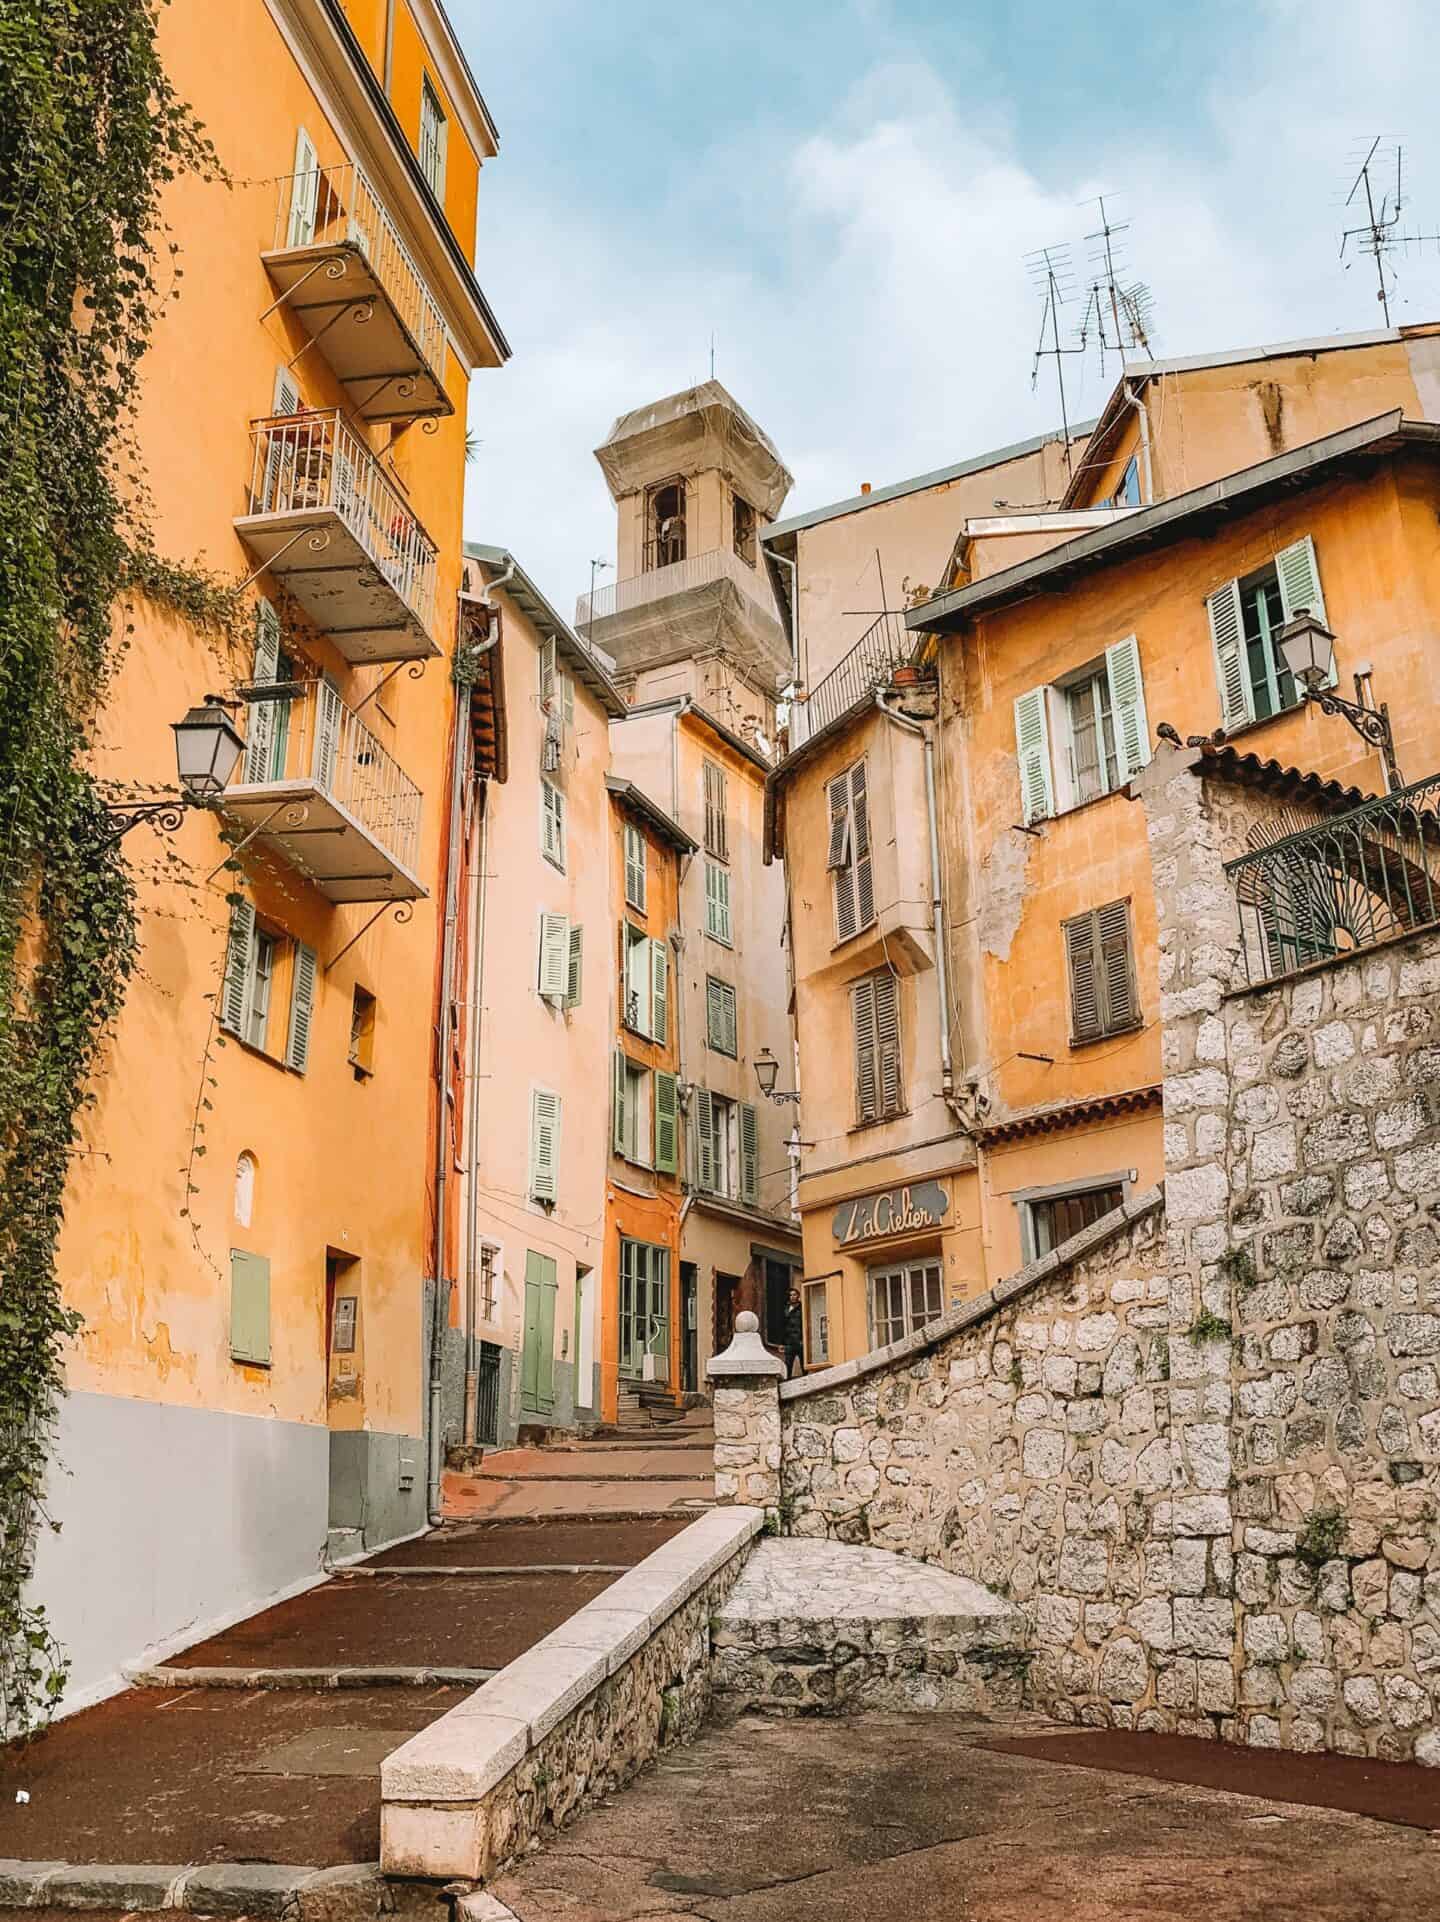 The colorful streets of Nice were a welcome sight during our two days in the French Riviera